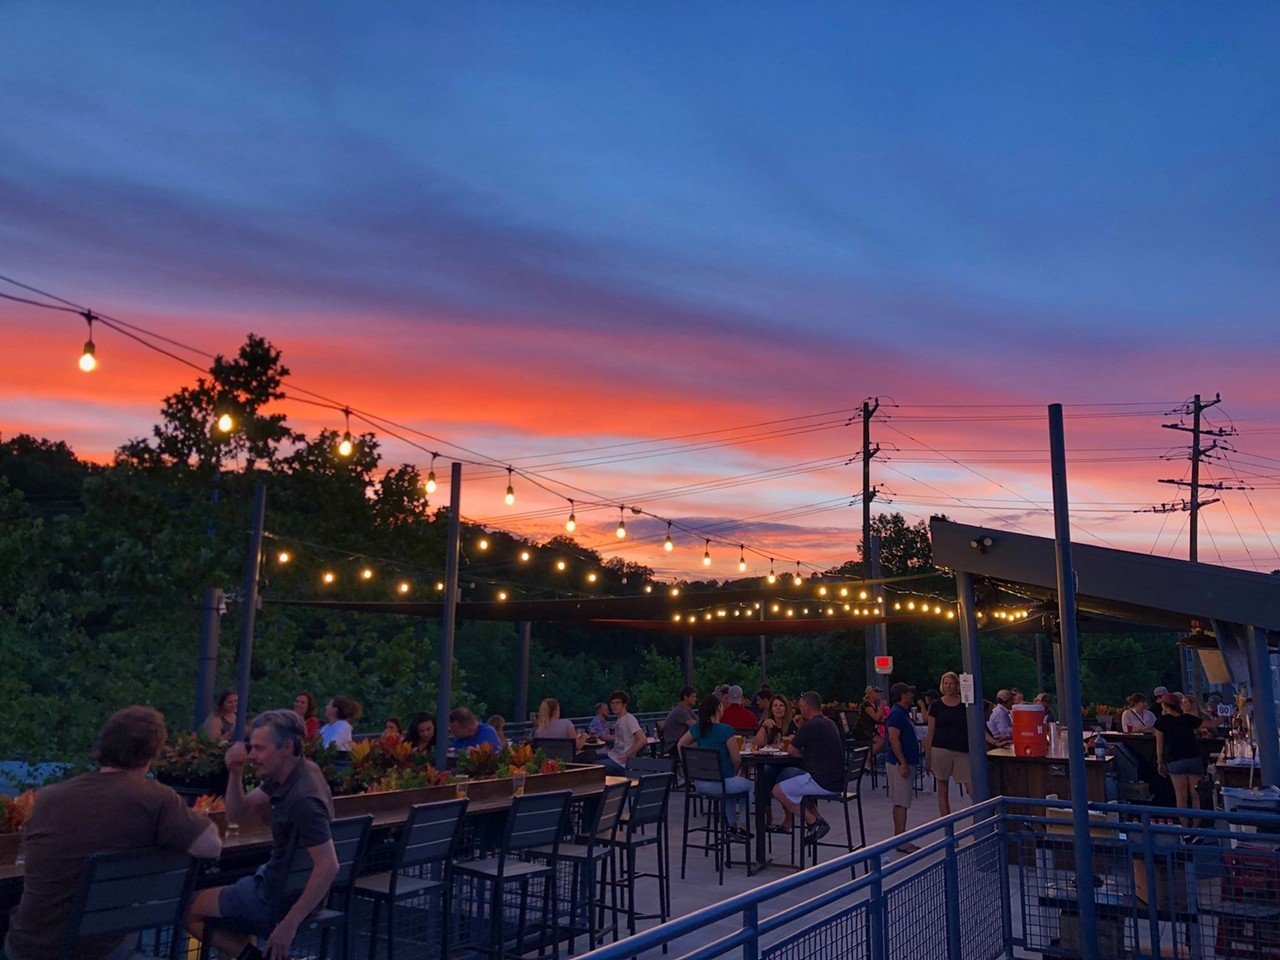 Little Miami Brewing Co.
208 Mill St., Milford
Little Miami Brewing Co. features a patio that overlooks the scenic namesake river. Stop by the popular Milford brewery to enjoy some of their 16 seasonal craft beers on tap and hand-tossed pizza, plus some breezy views.